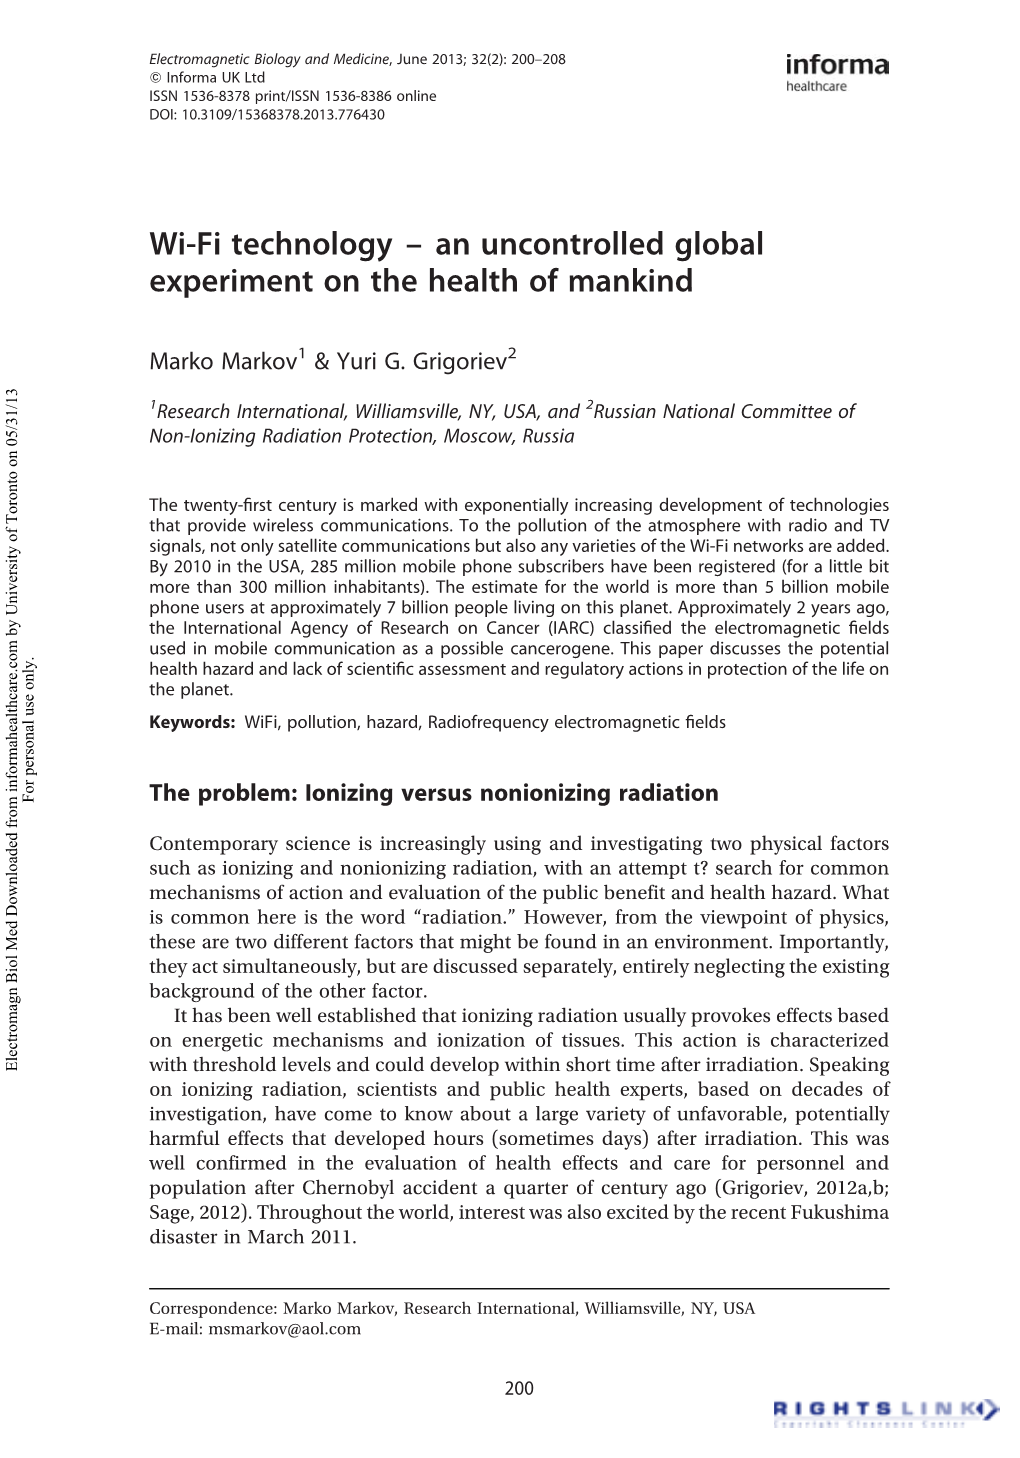 Wi-Fi Technology – an Uncontrolled Global Experiment on the Health of Mankind